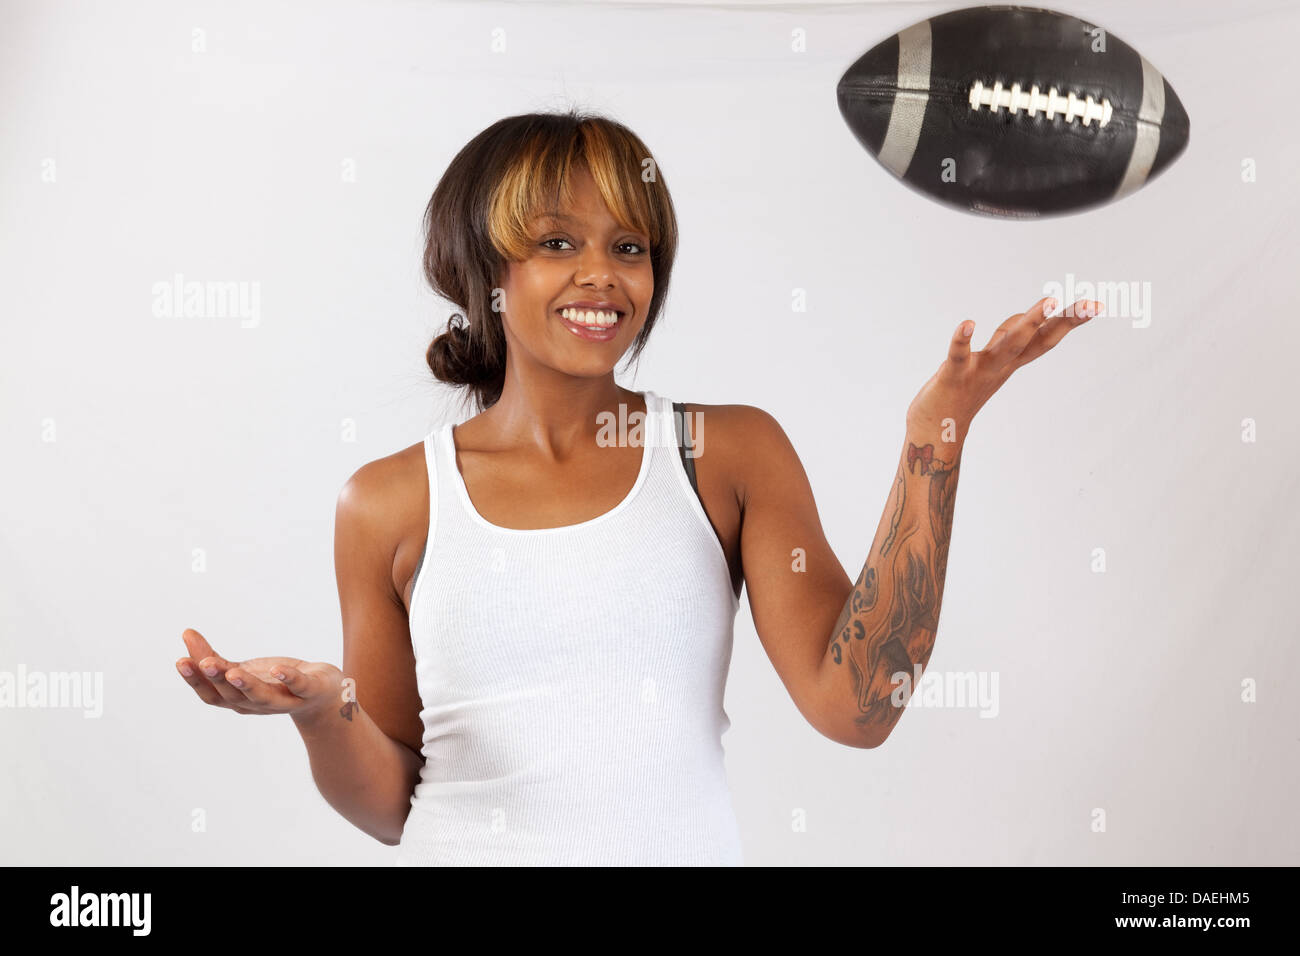 Pretty black woman in an undershirt tossing a football in the air and smiling at the camera with a happy smile Stock Photo